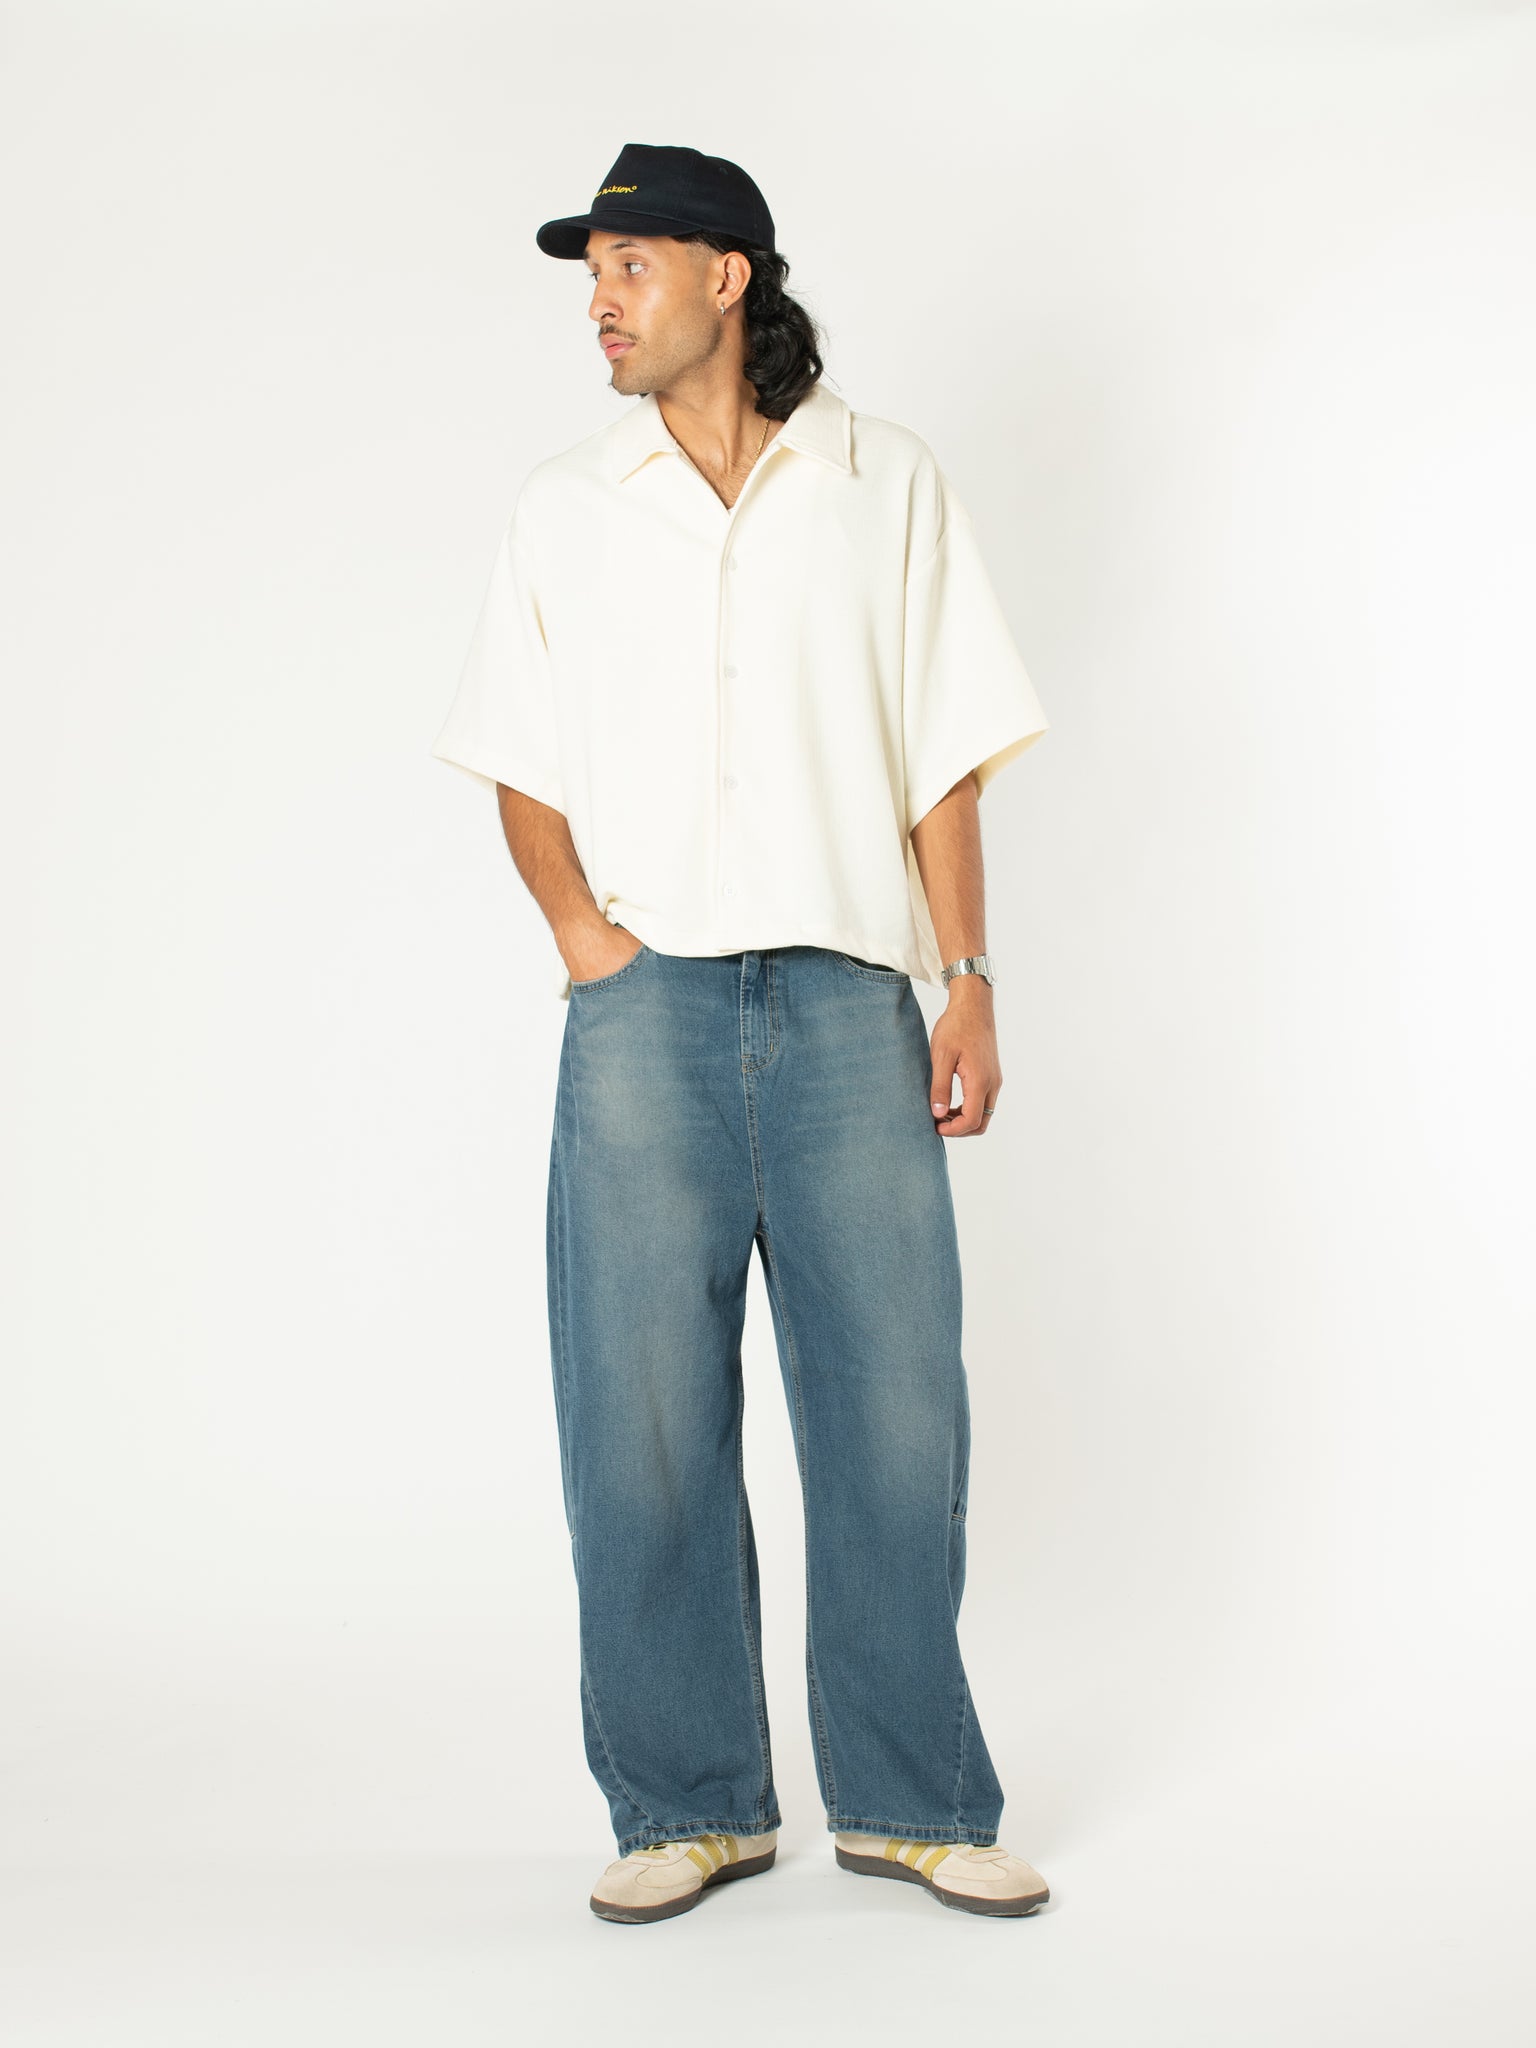 Outseam Dart Jeans